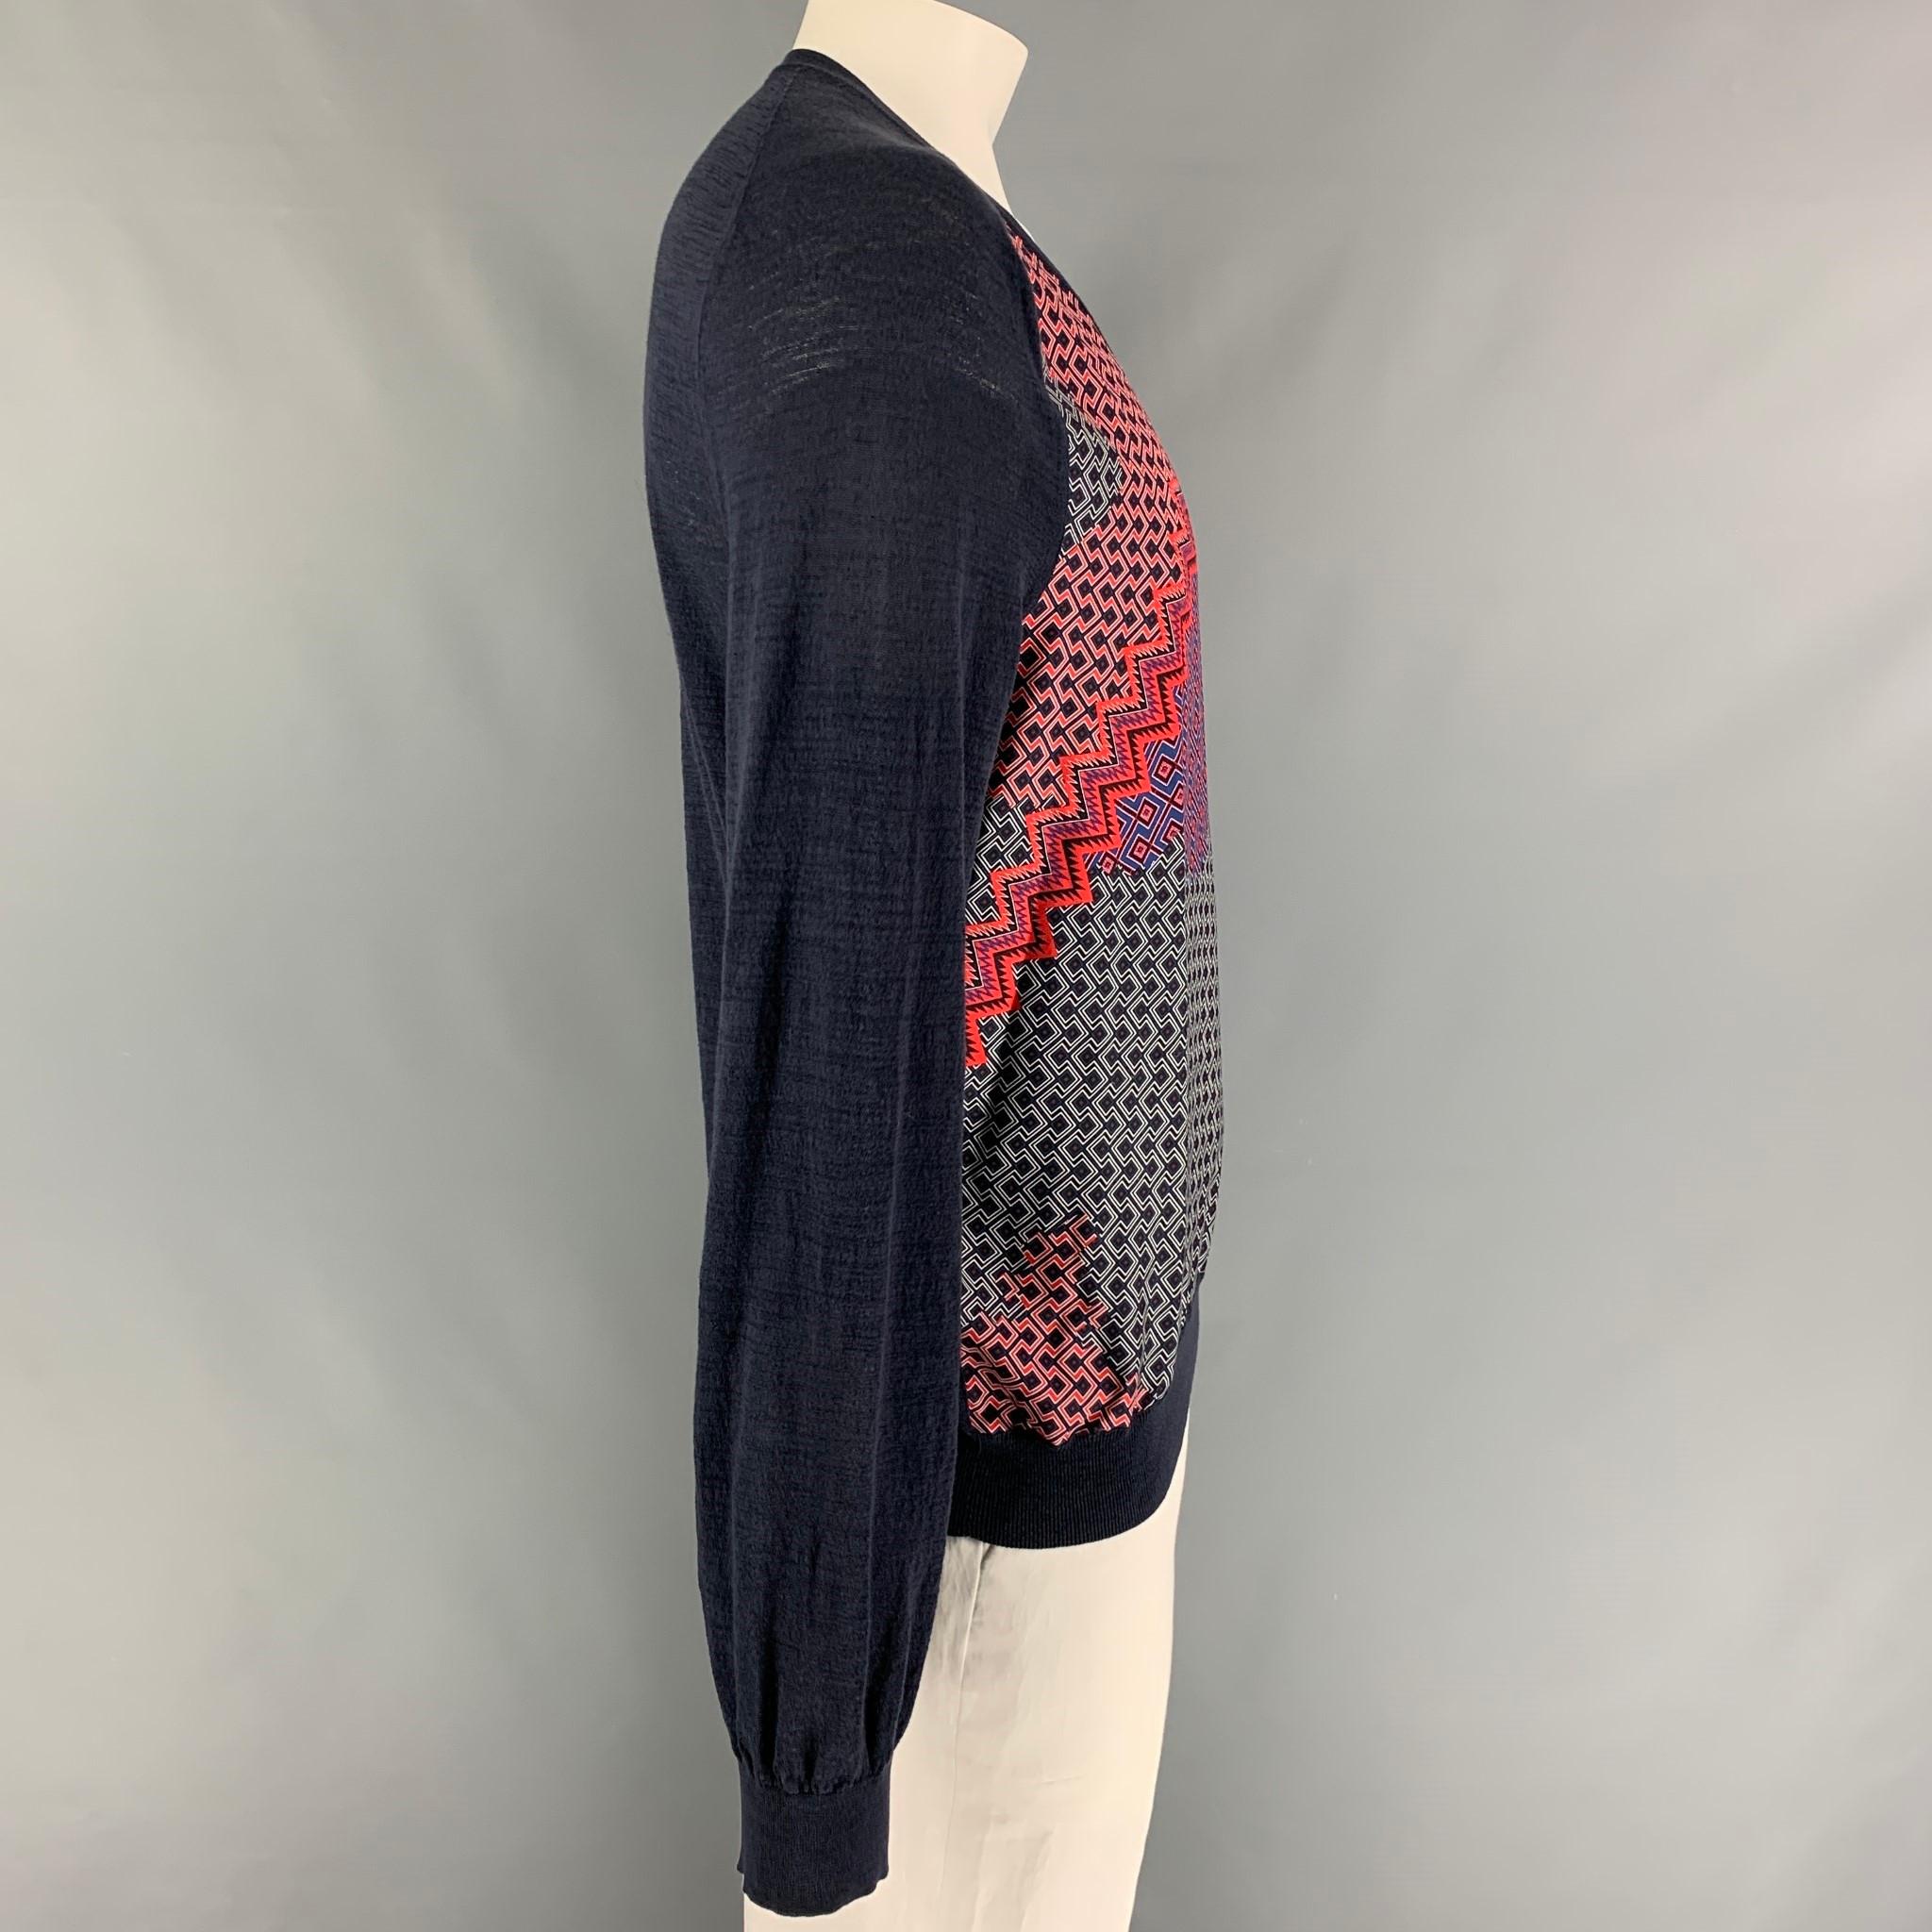 LANVIN pullover comes in a navy & red print cotton / nylon featuring a v-neck. Made in Italy. 

New With Tags. 
Marked: XL

Measurements:

Shoulder: 17 in.
Chest: 44 in.
Sleeve: 34 in.
Length: 26.5 in. 